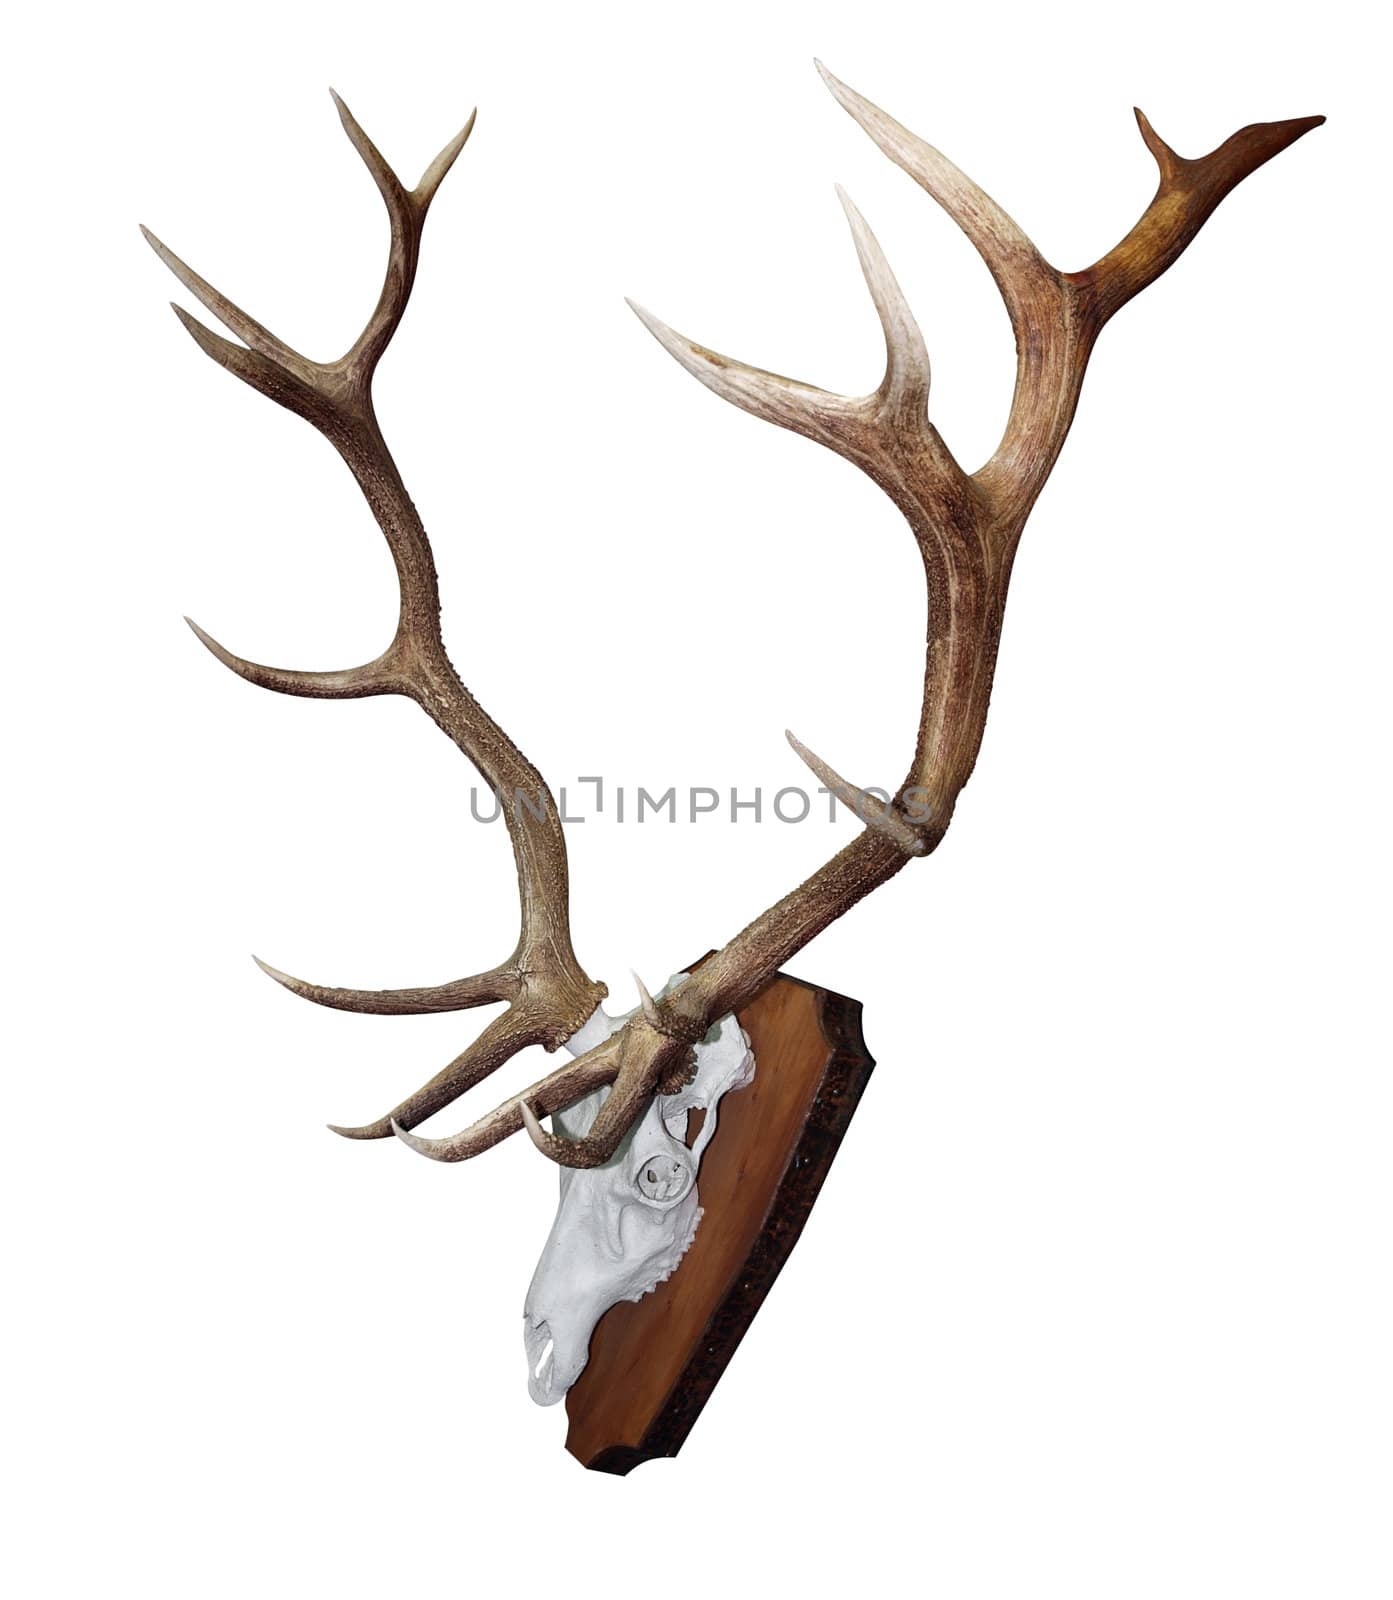 15 Point Mounted Stag Horns isolated with clipping path